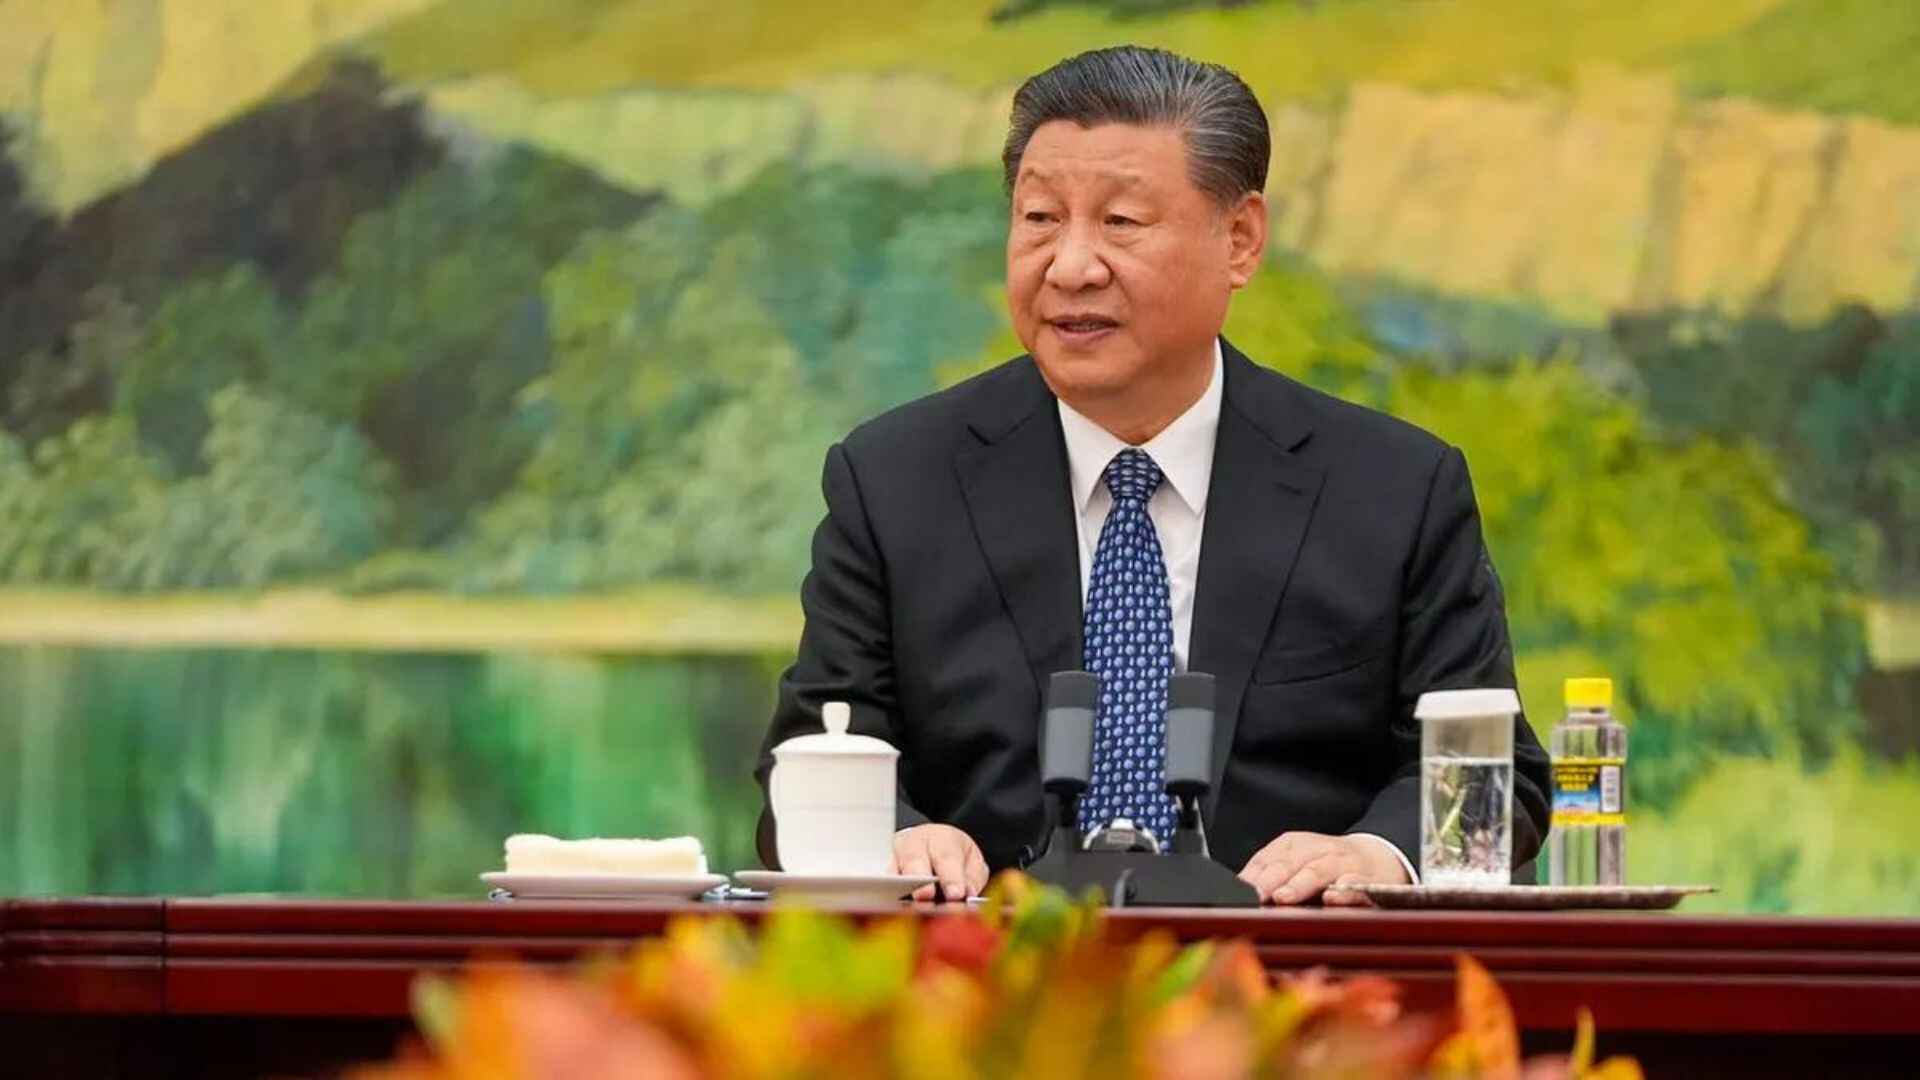 Chinese President Xi Embarks On Six-Day European Tour Amidst Trade Frictions With EU